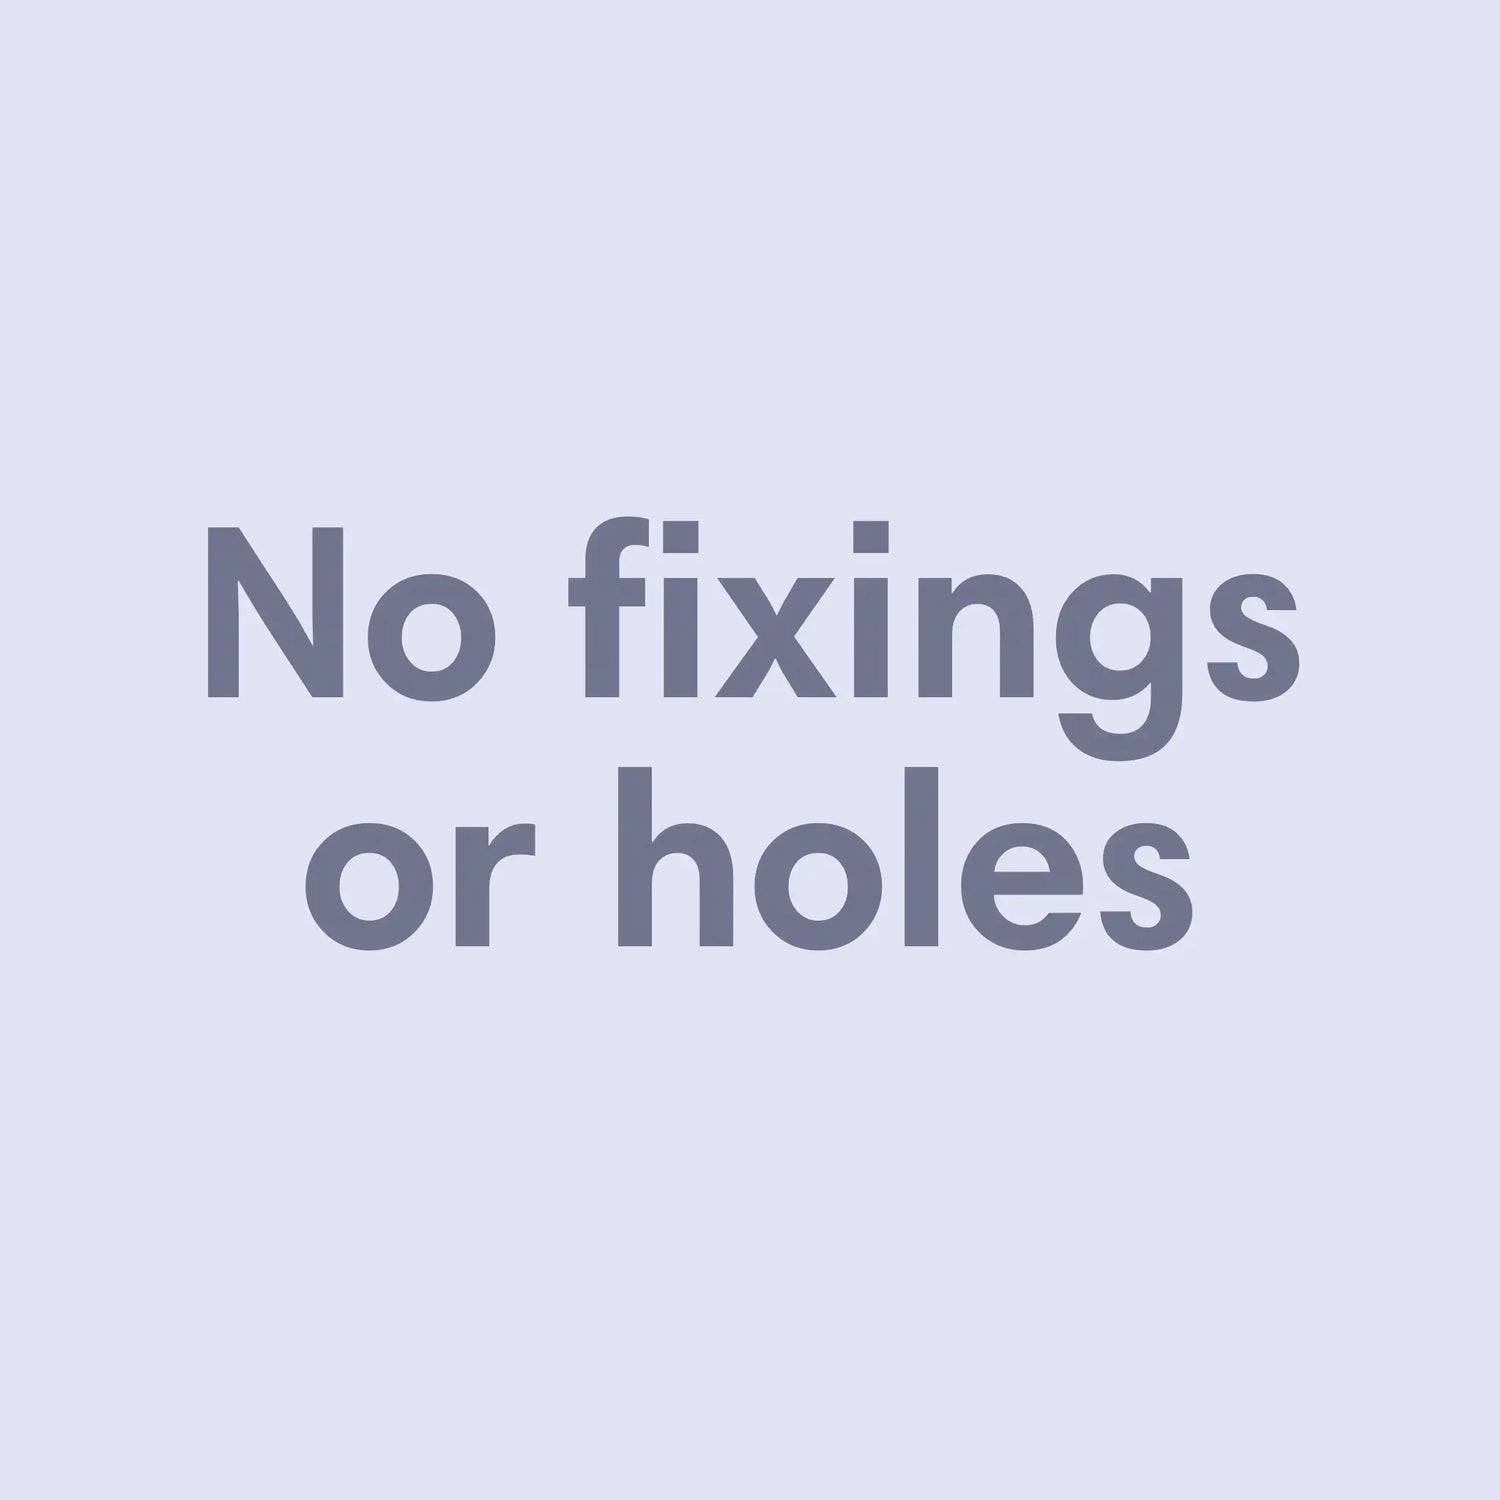 no holes or fixings